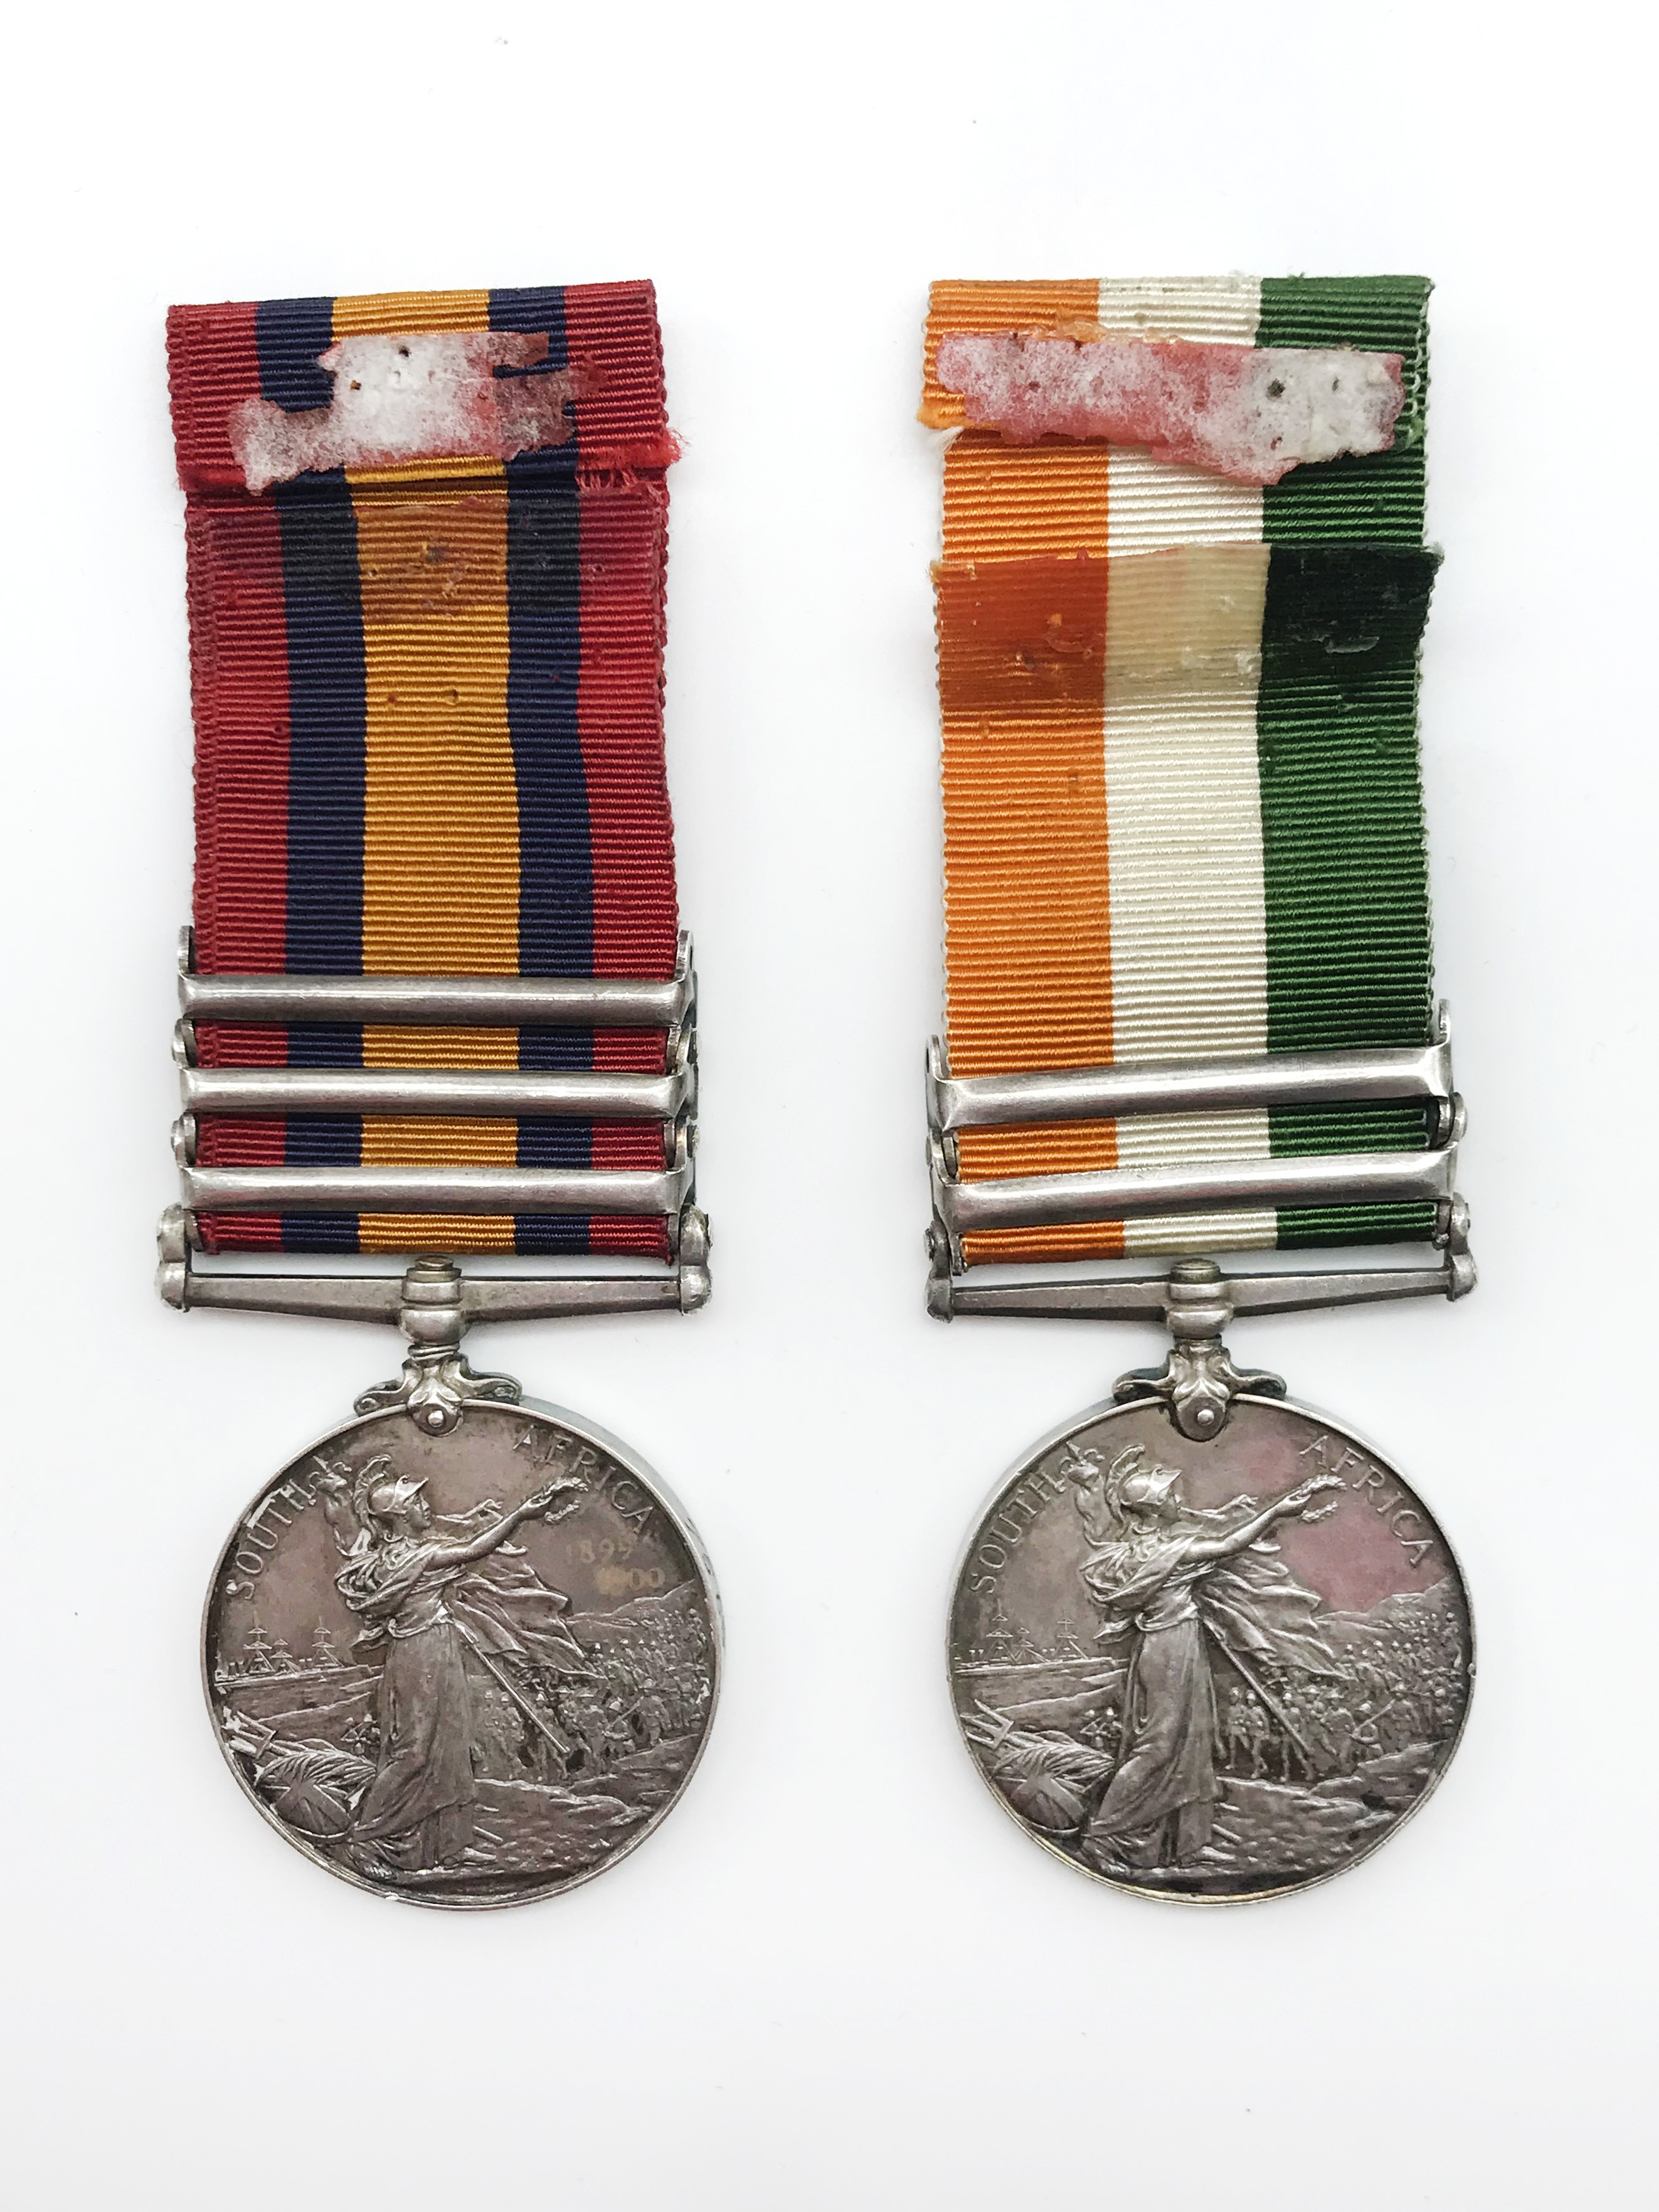 PAIR OF ANGLO-BOER WAR QUEEN'S AND KING'S SOUTH AFRICA MEDALS TO PTE A G AITCHESON 7565 SCOTS GUARDS - Image 2 of 12